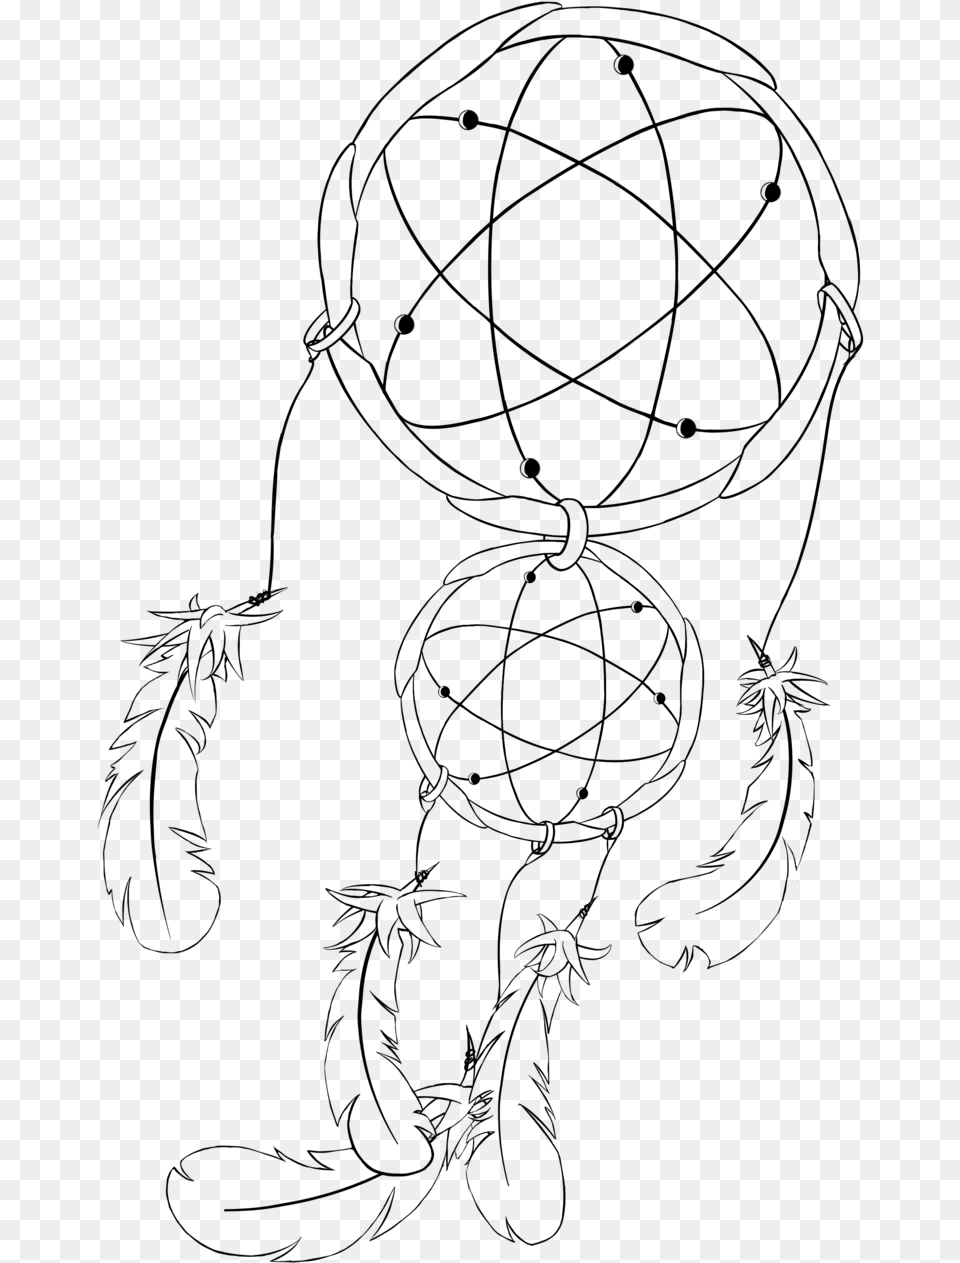 Picture Freeuse Download Drawing At Getdrawings Com Simple Dream Catcher Transparent, Gray Png Image